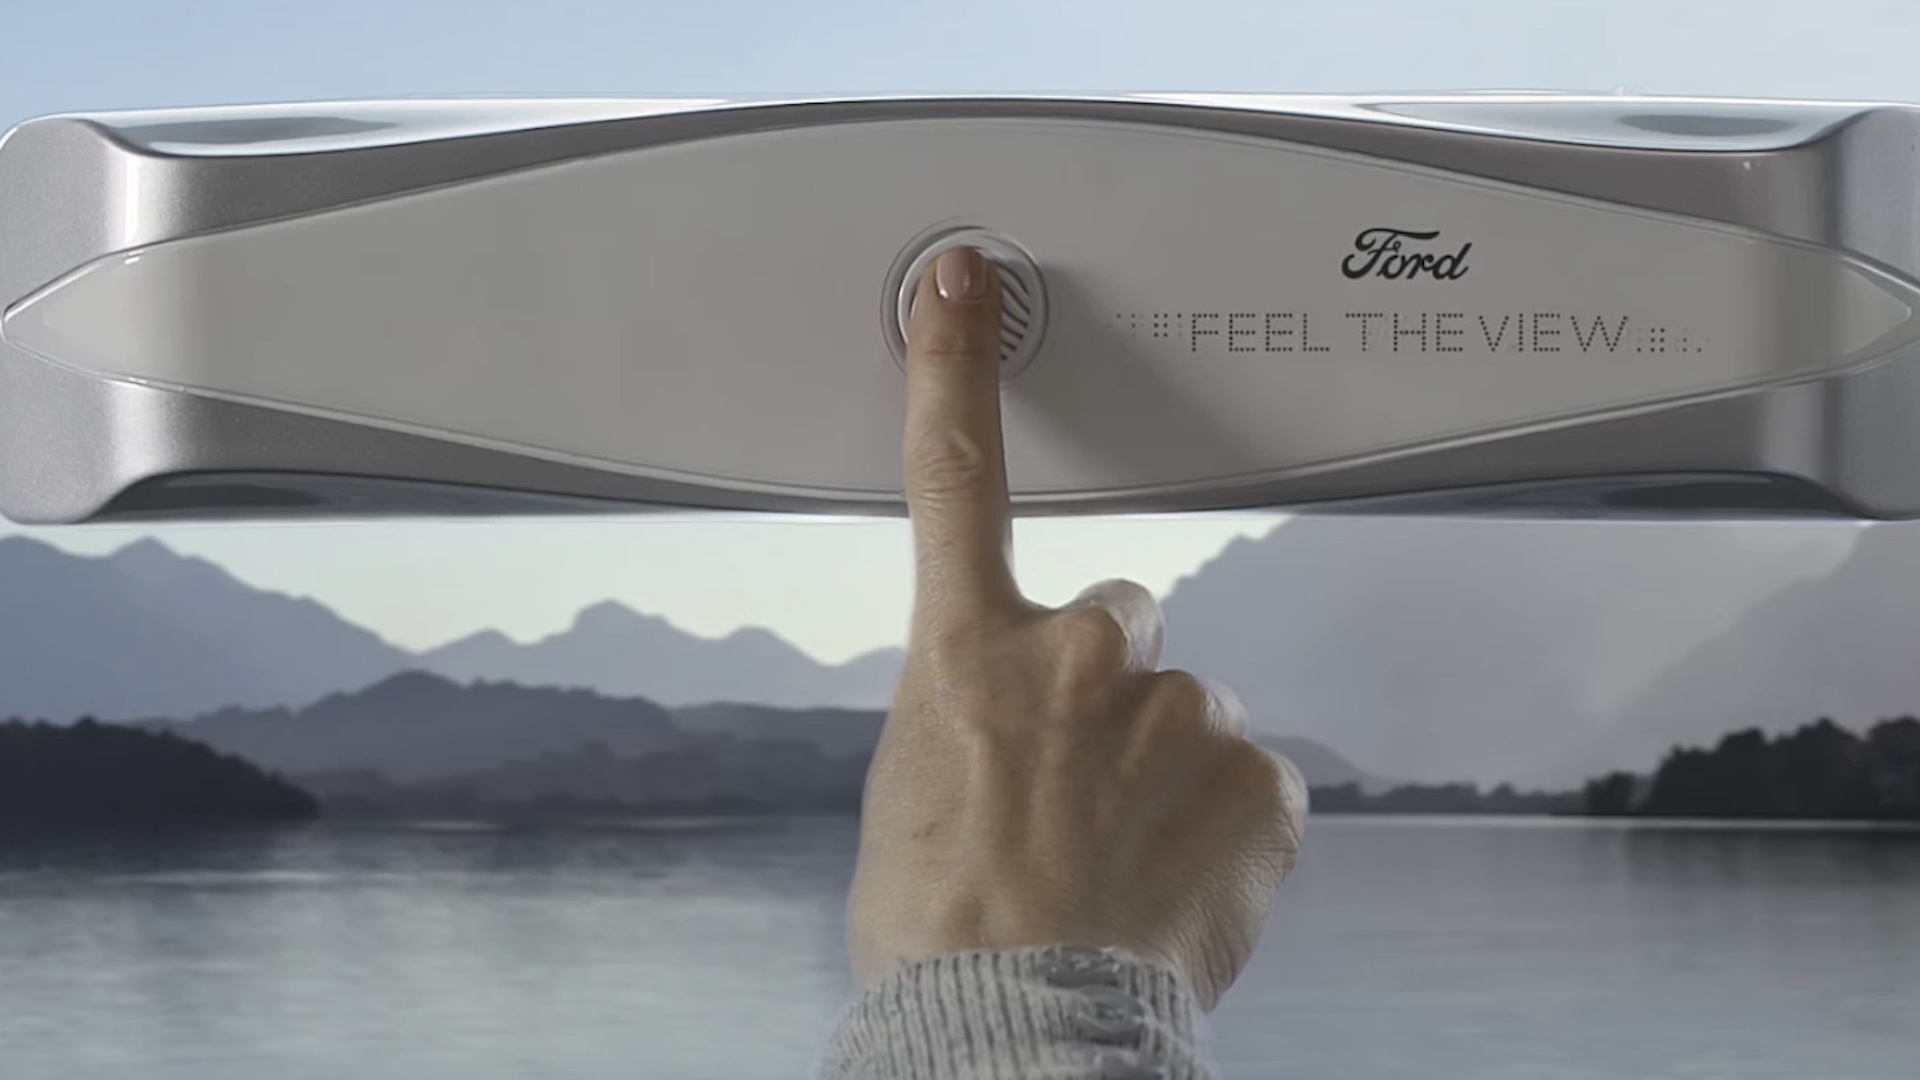 Ford "Feel the View" system to help the blind take in scenery